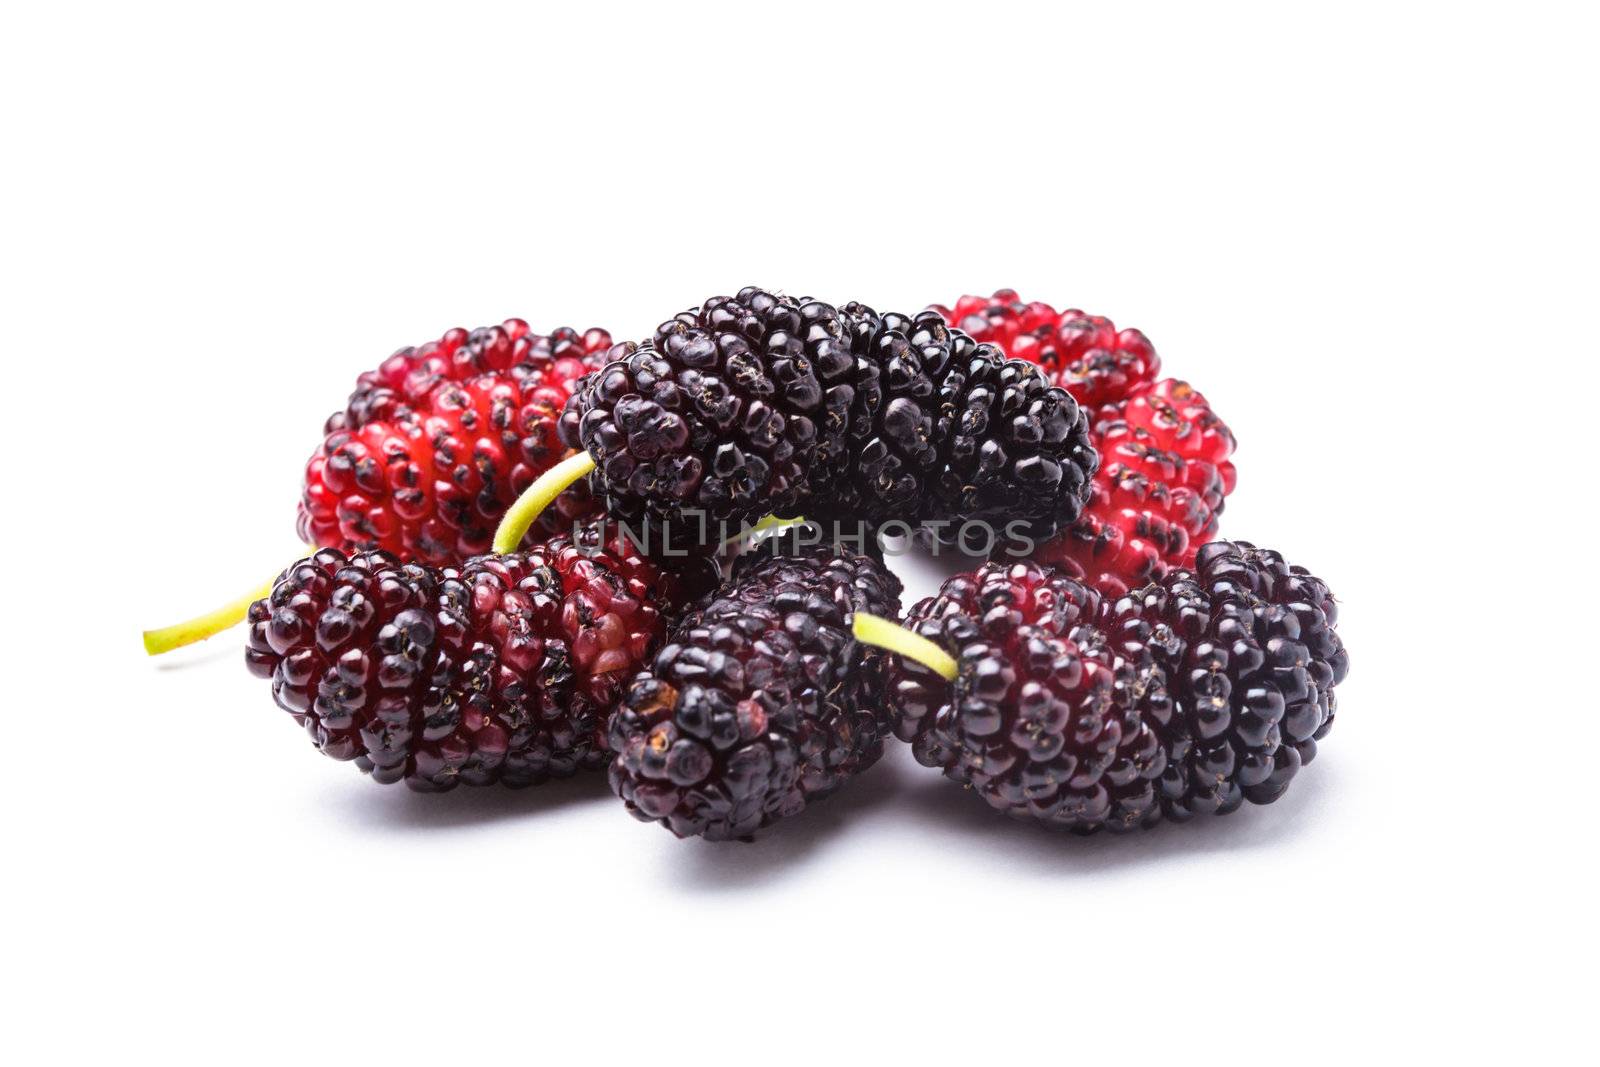 Mulberry berries by oksix